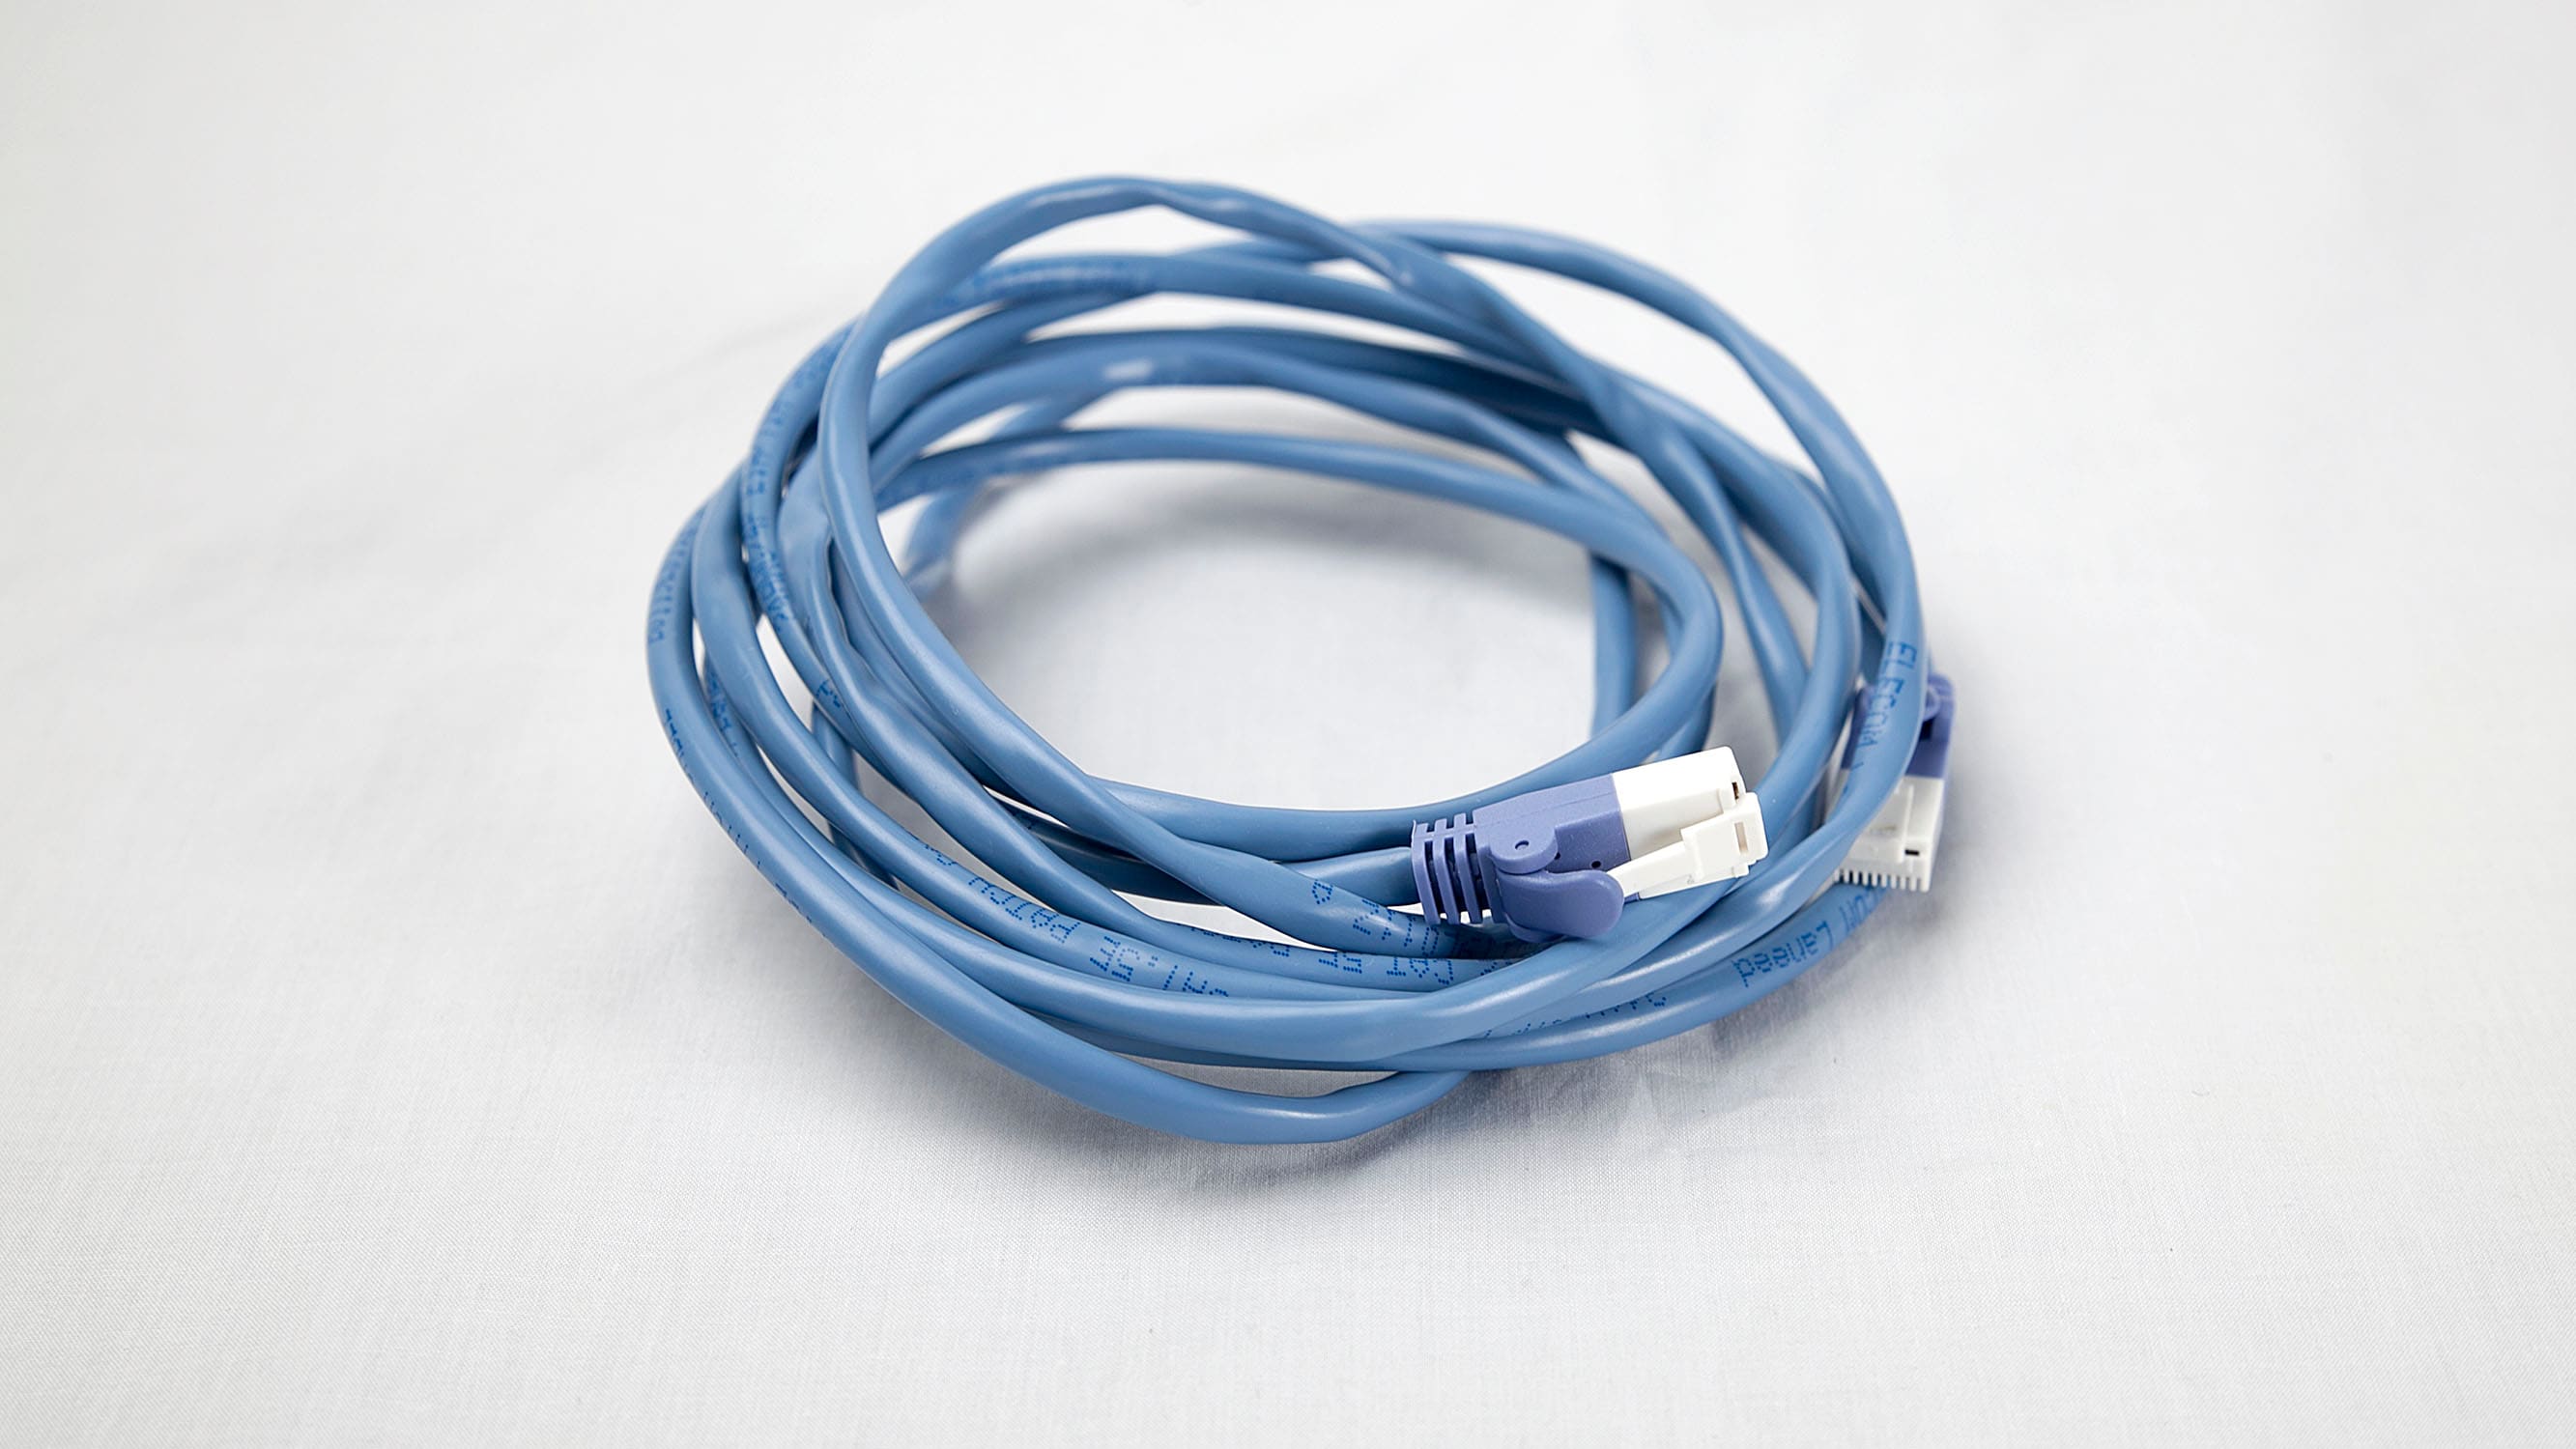 LAN cables are available in each room.